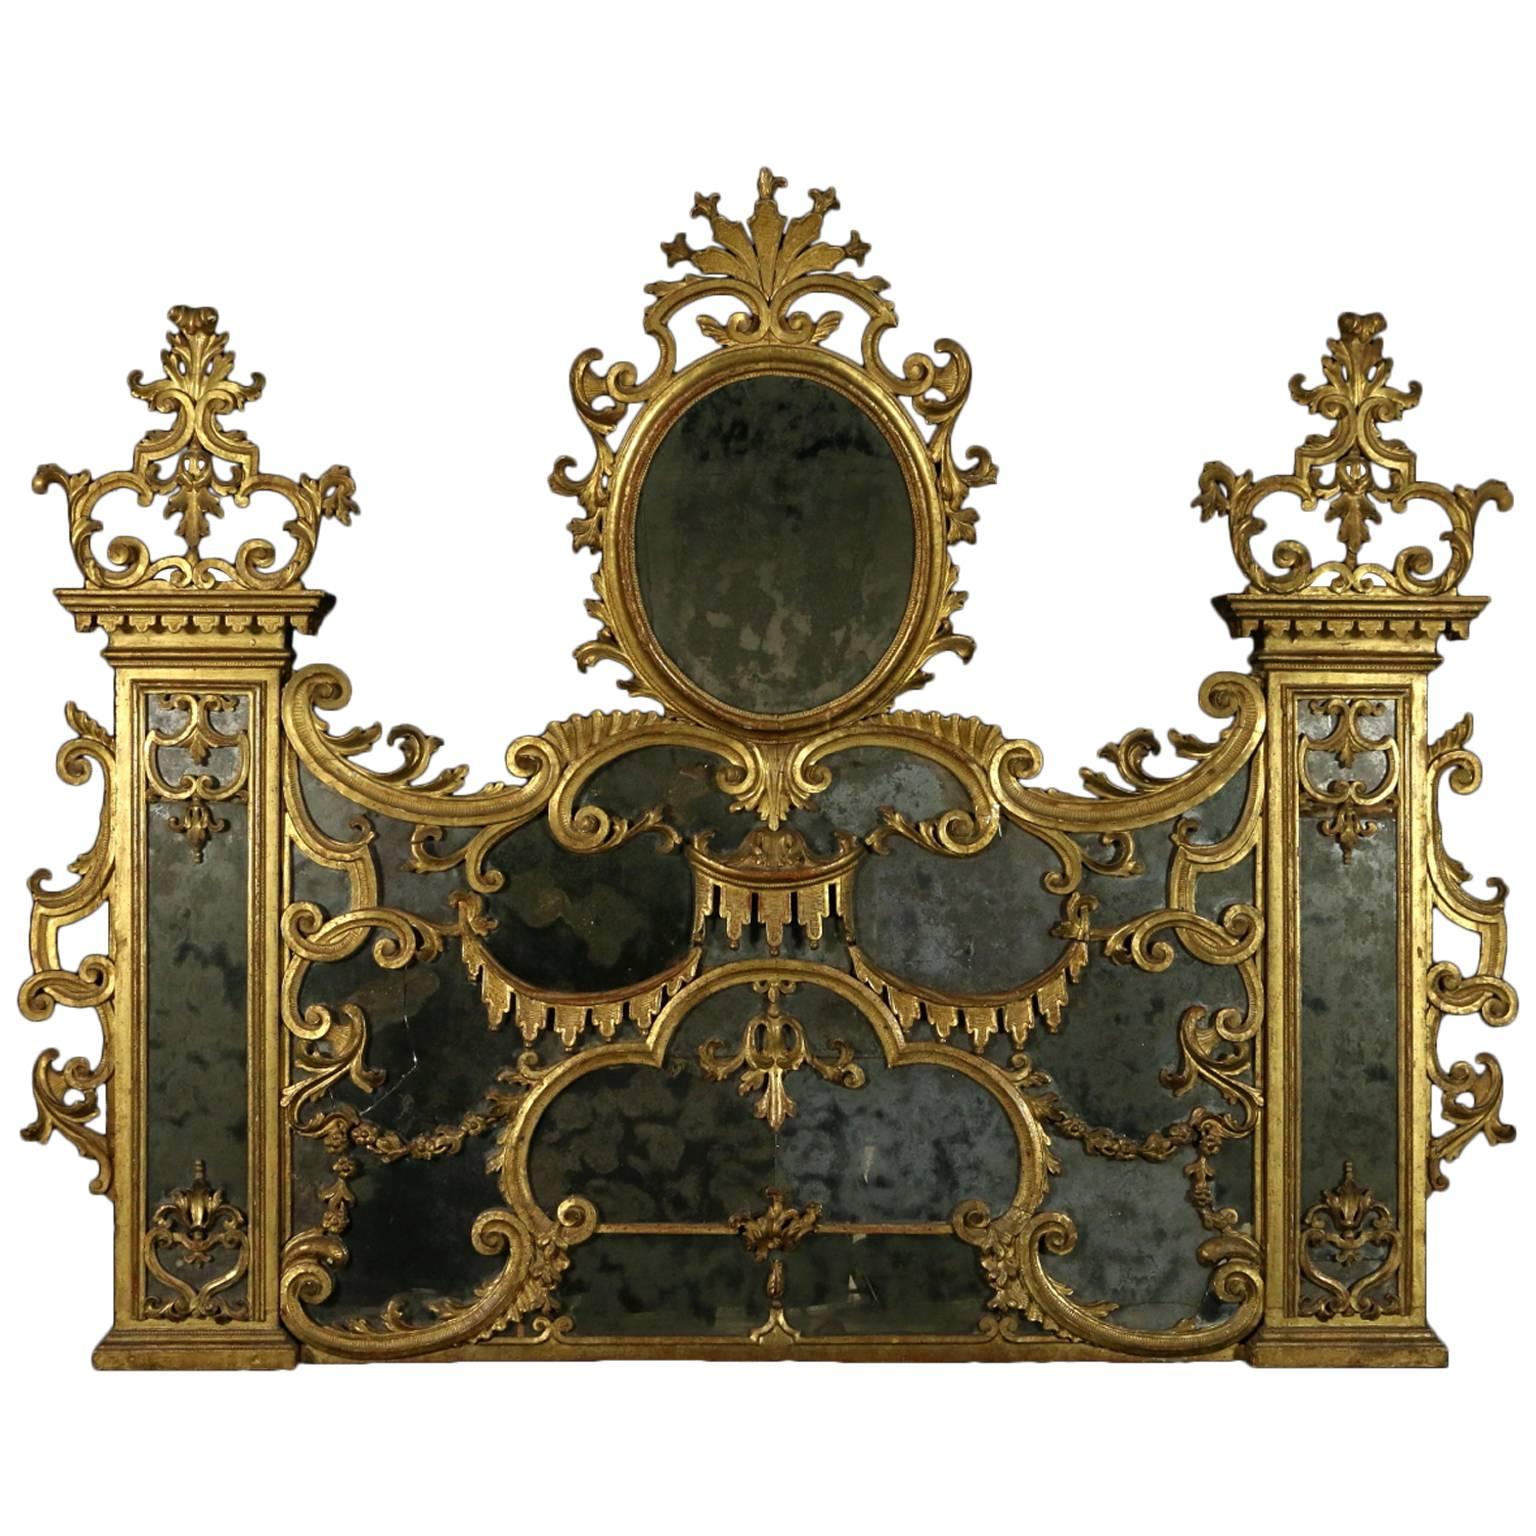 Early 18th Century Baroque Linden Carved and Gilded Wall Mirror for Fireplace